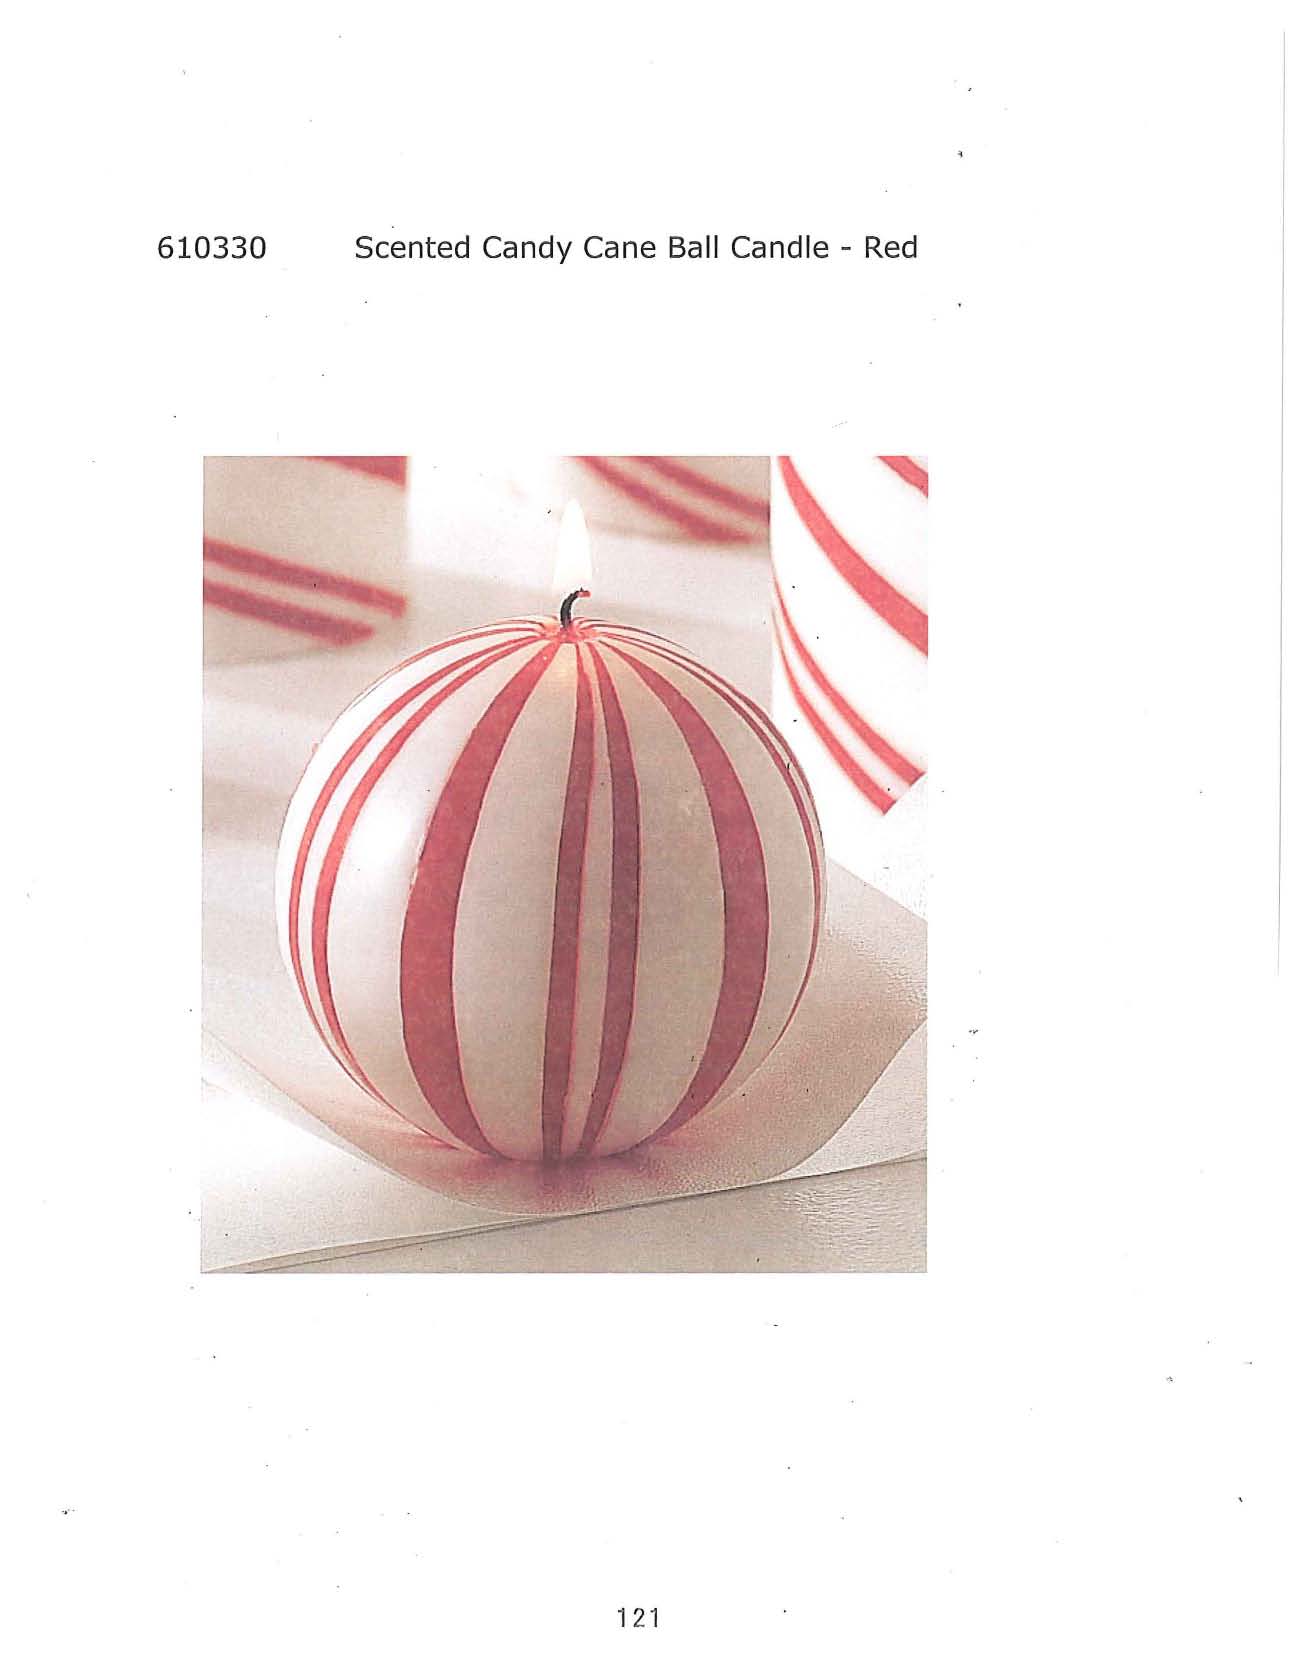 Scented Candy Cane Ball Candle - Red